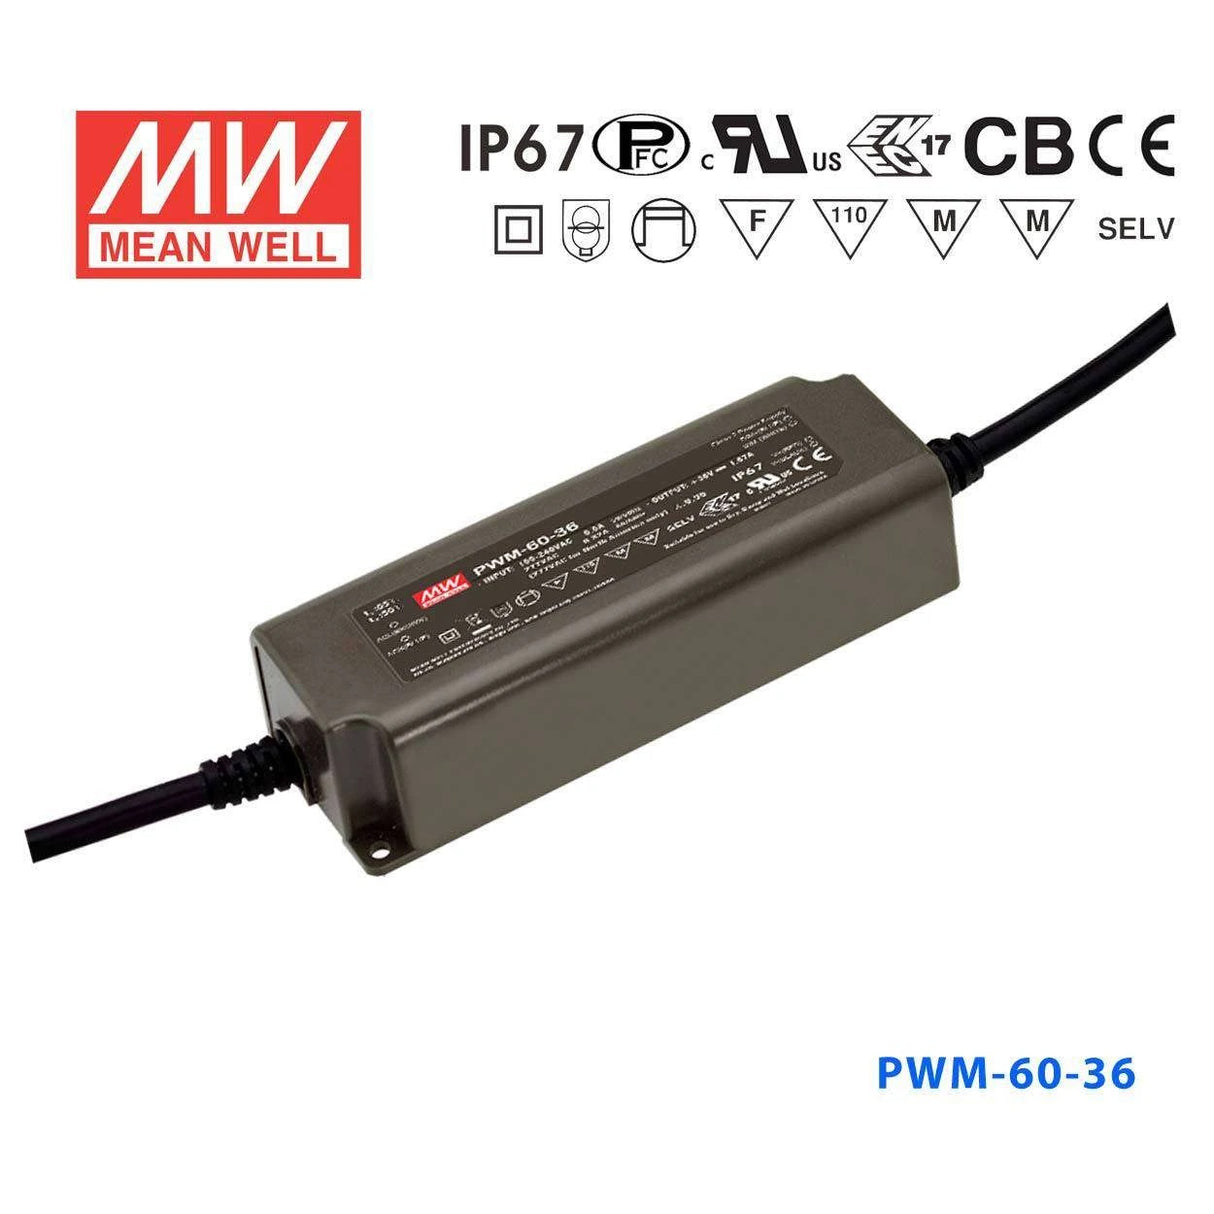 Mean Well PWM-60-36 Power Supply 60W 36V - Dimmable